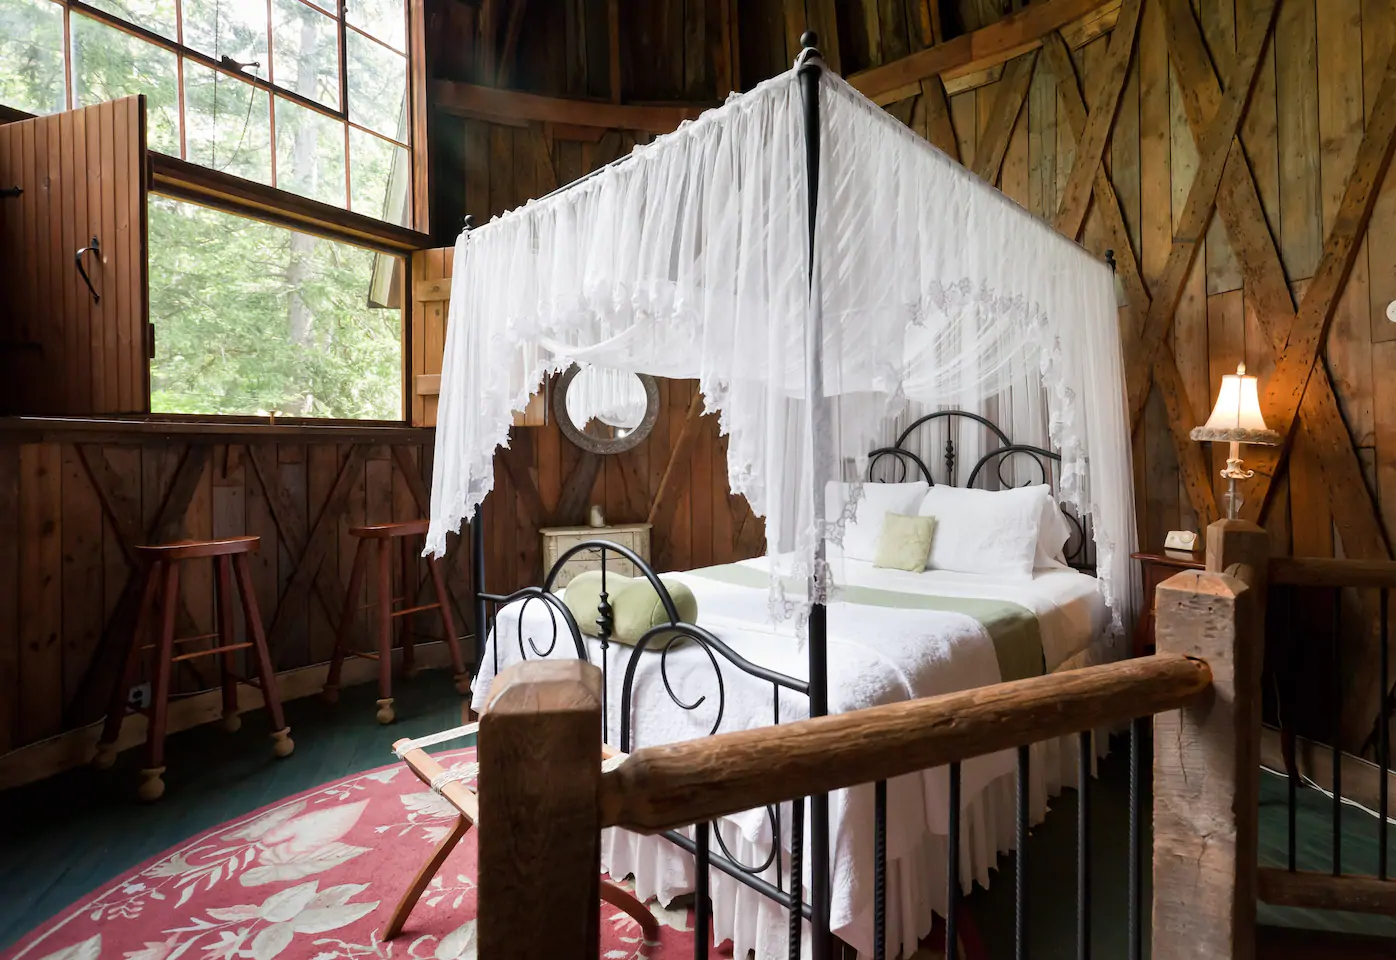 A white canopy bed is in a wooden room.